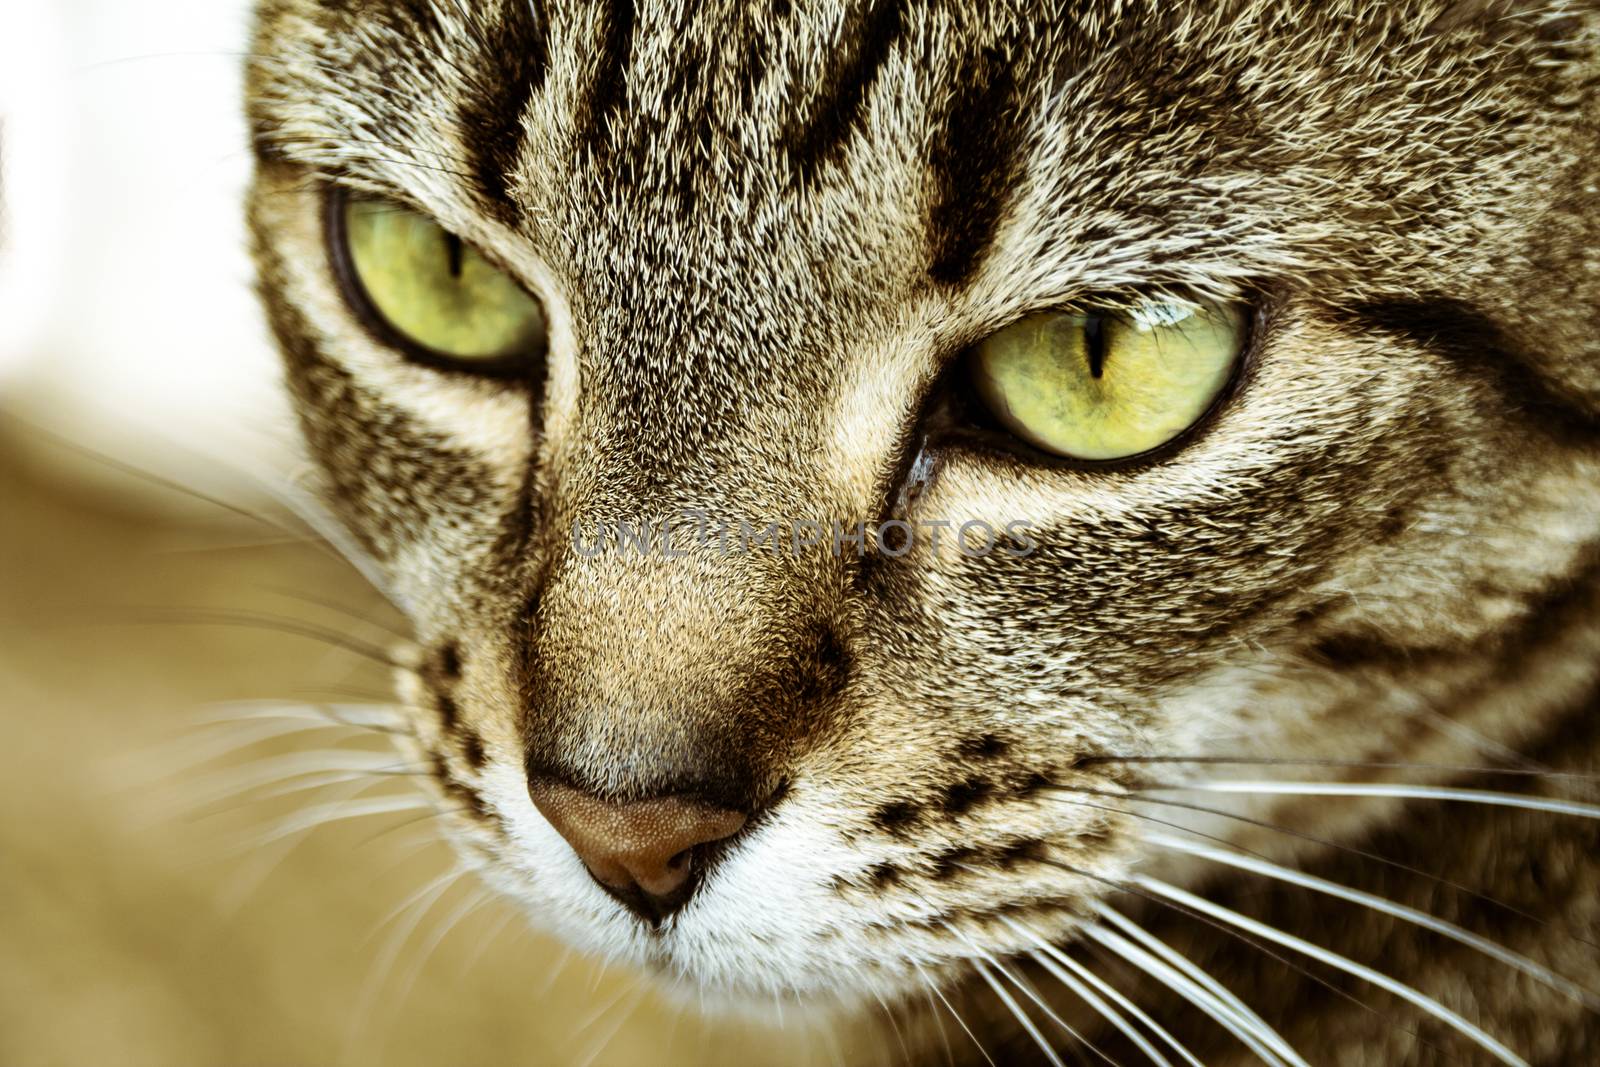 close up shot of a cats face showing detail by stockbp